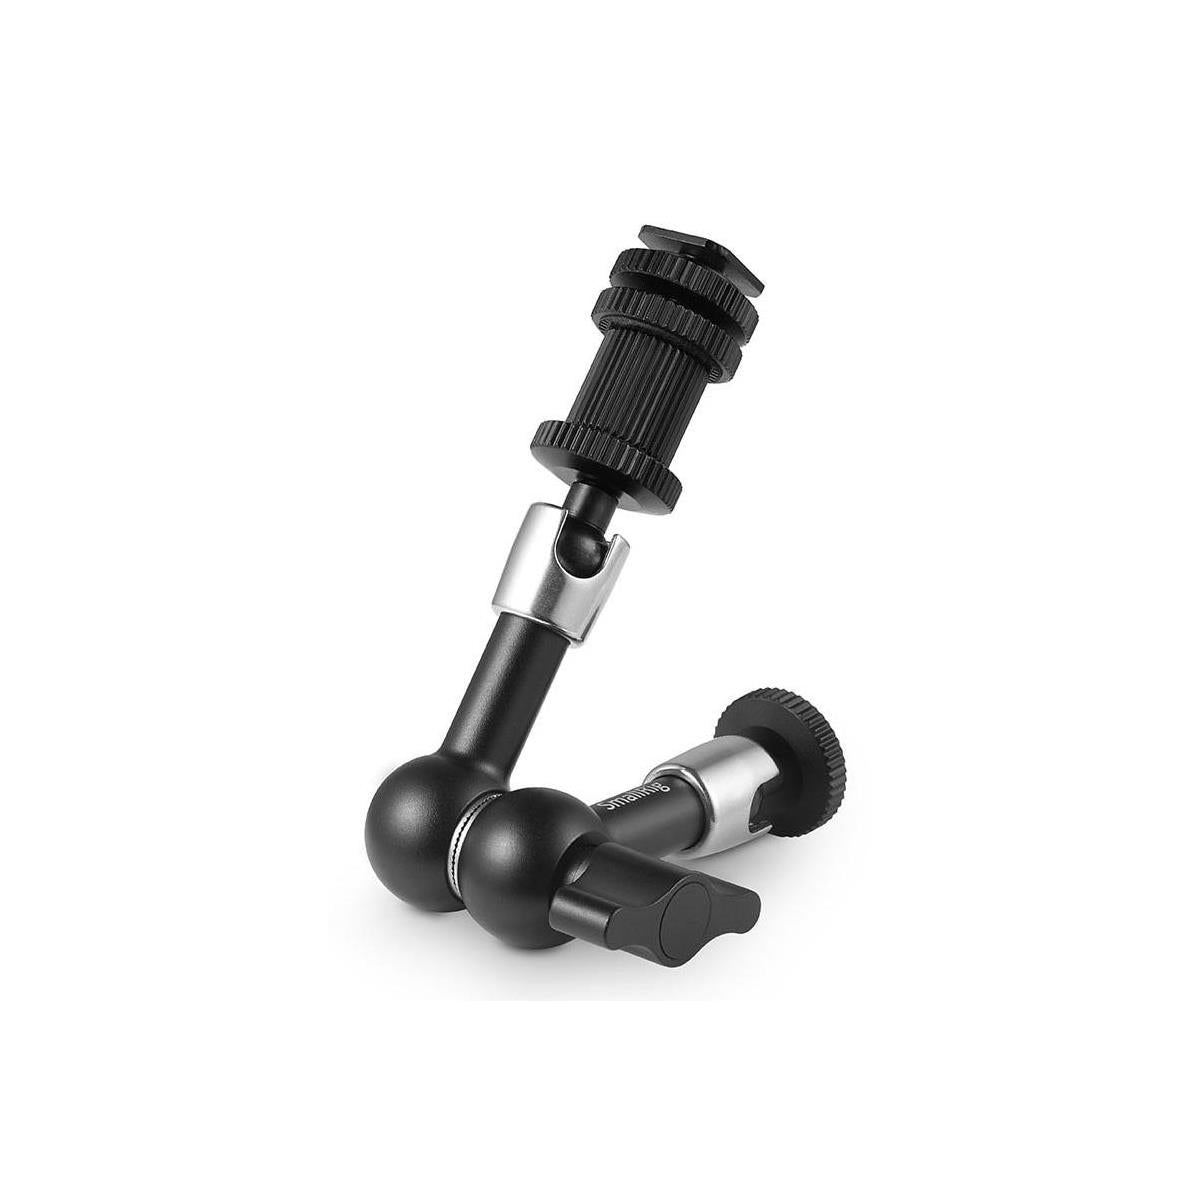 SmallRig Articulating Rosette Arm 7 inches Long with Cold Shoe Mount